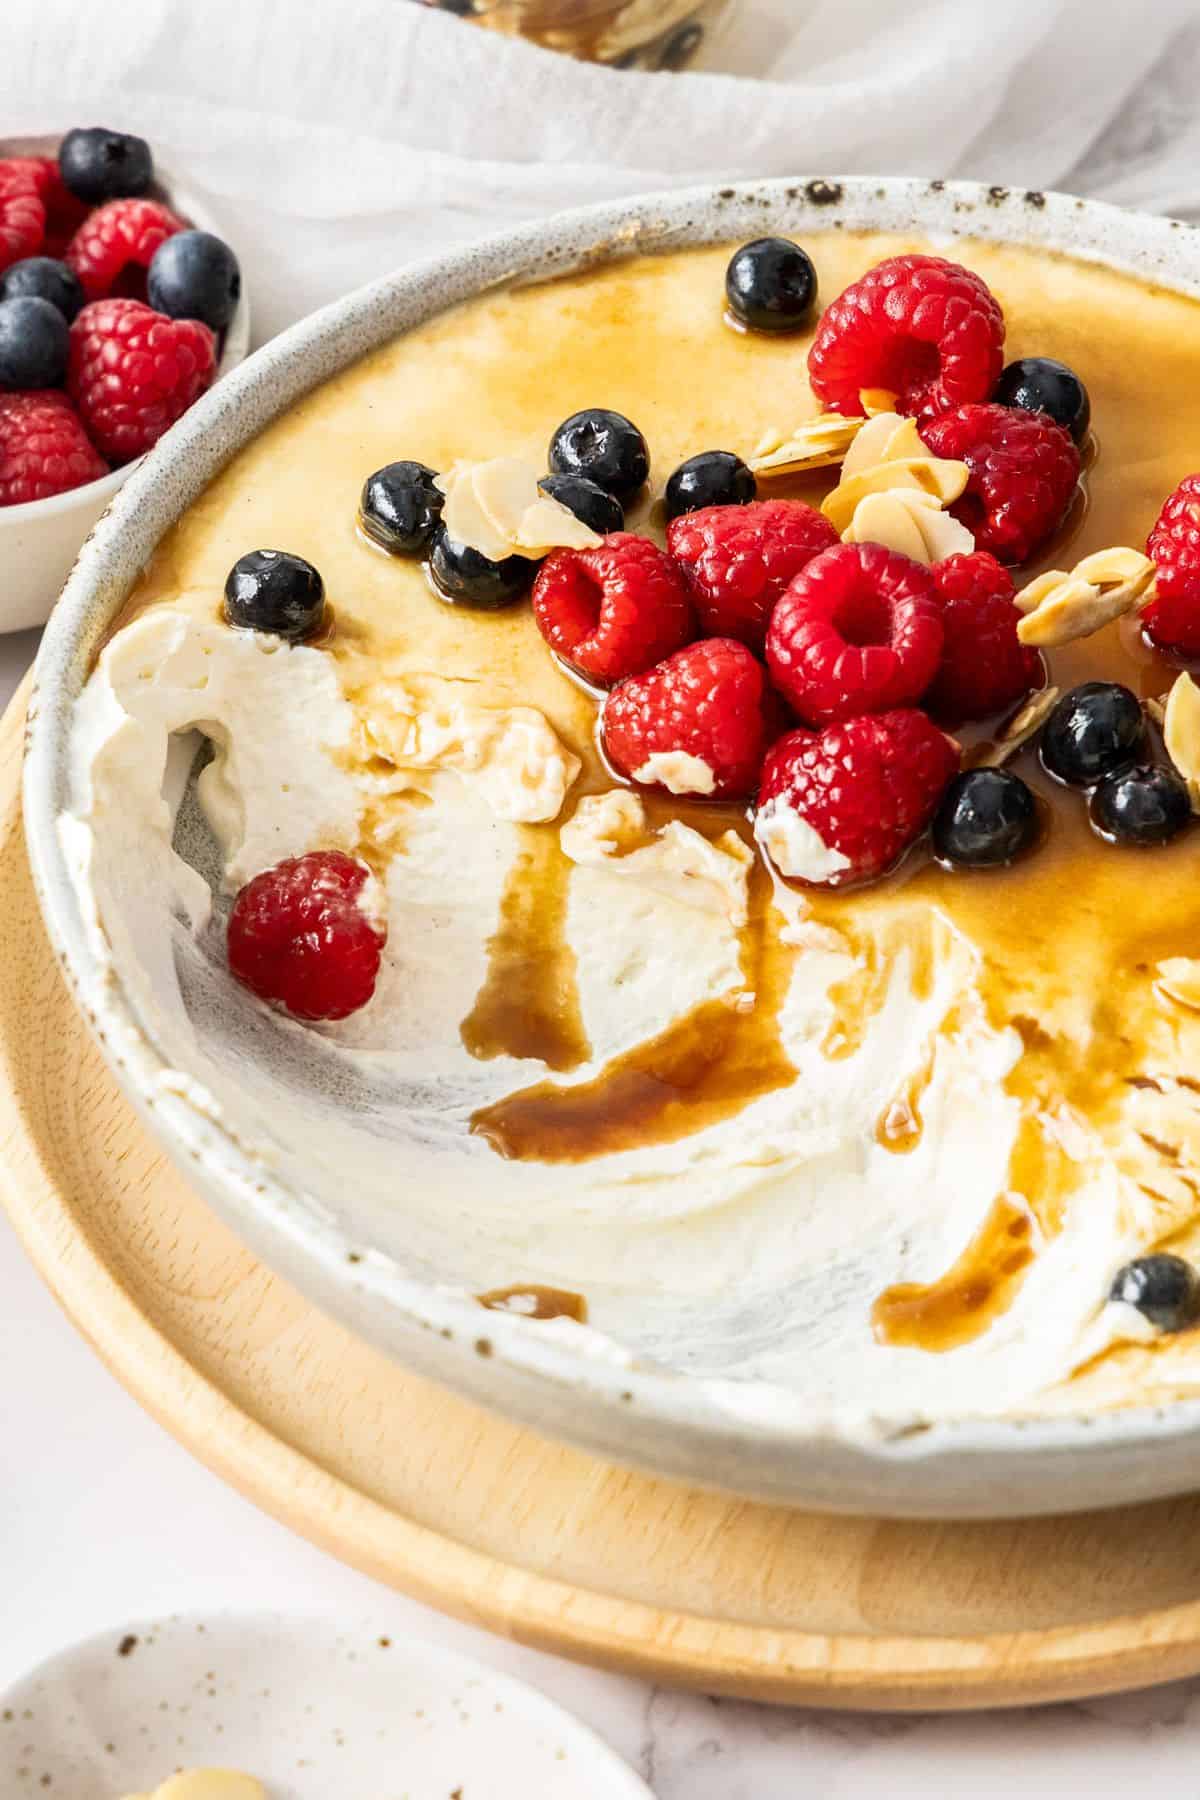 Round dish containing Caramelised Yoghurt Cream, garnished with mixed berries and flaked almonds, with a serve scooped out.